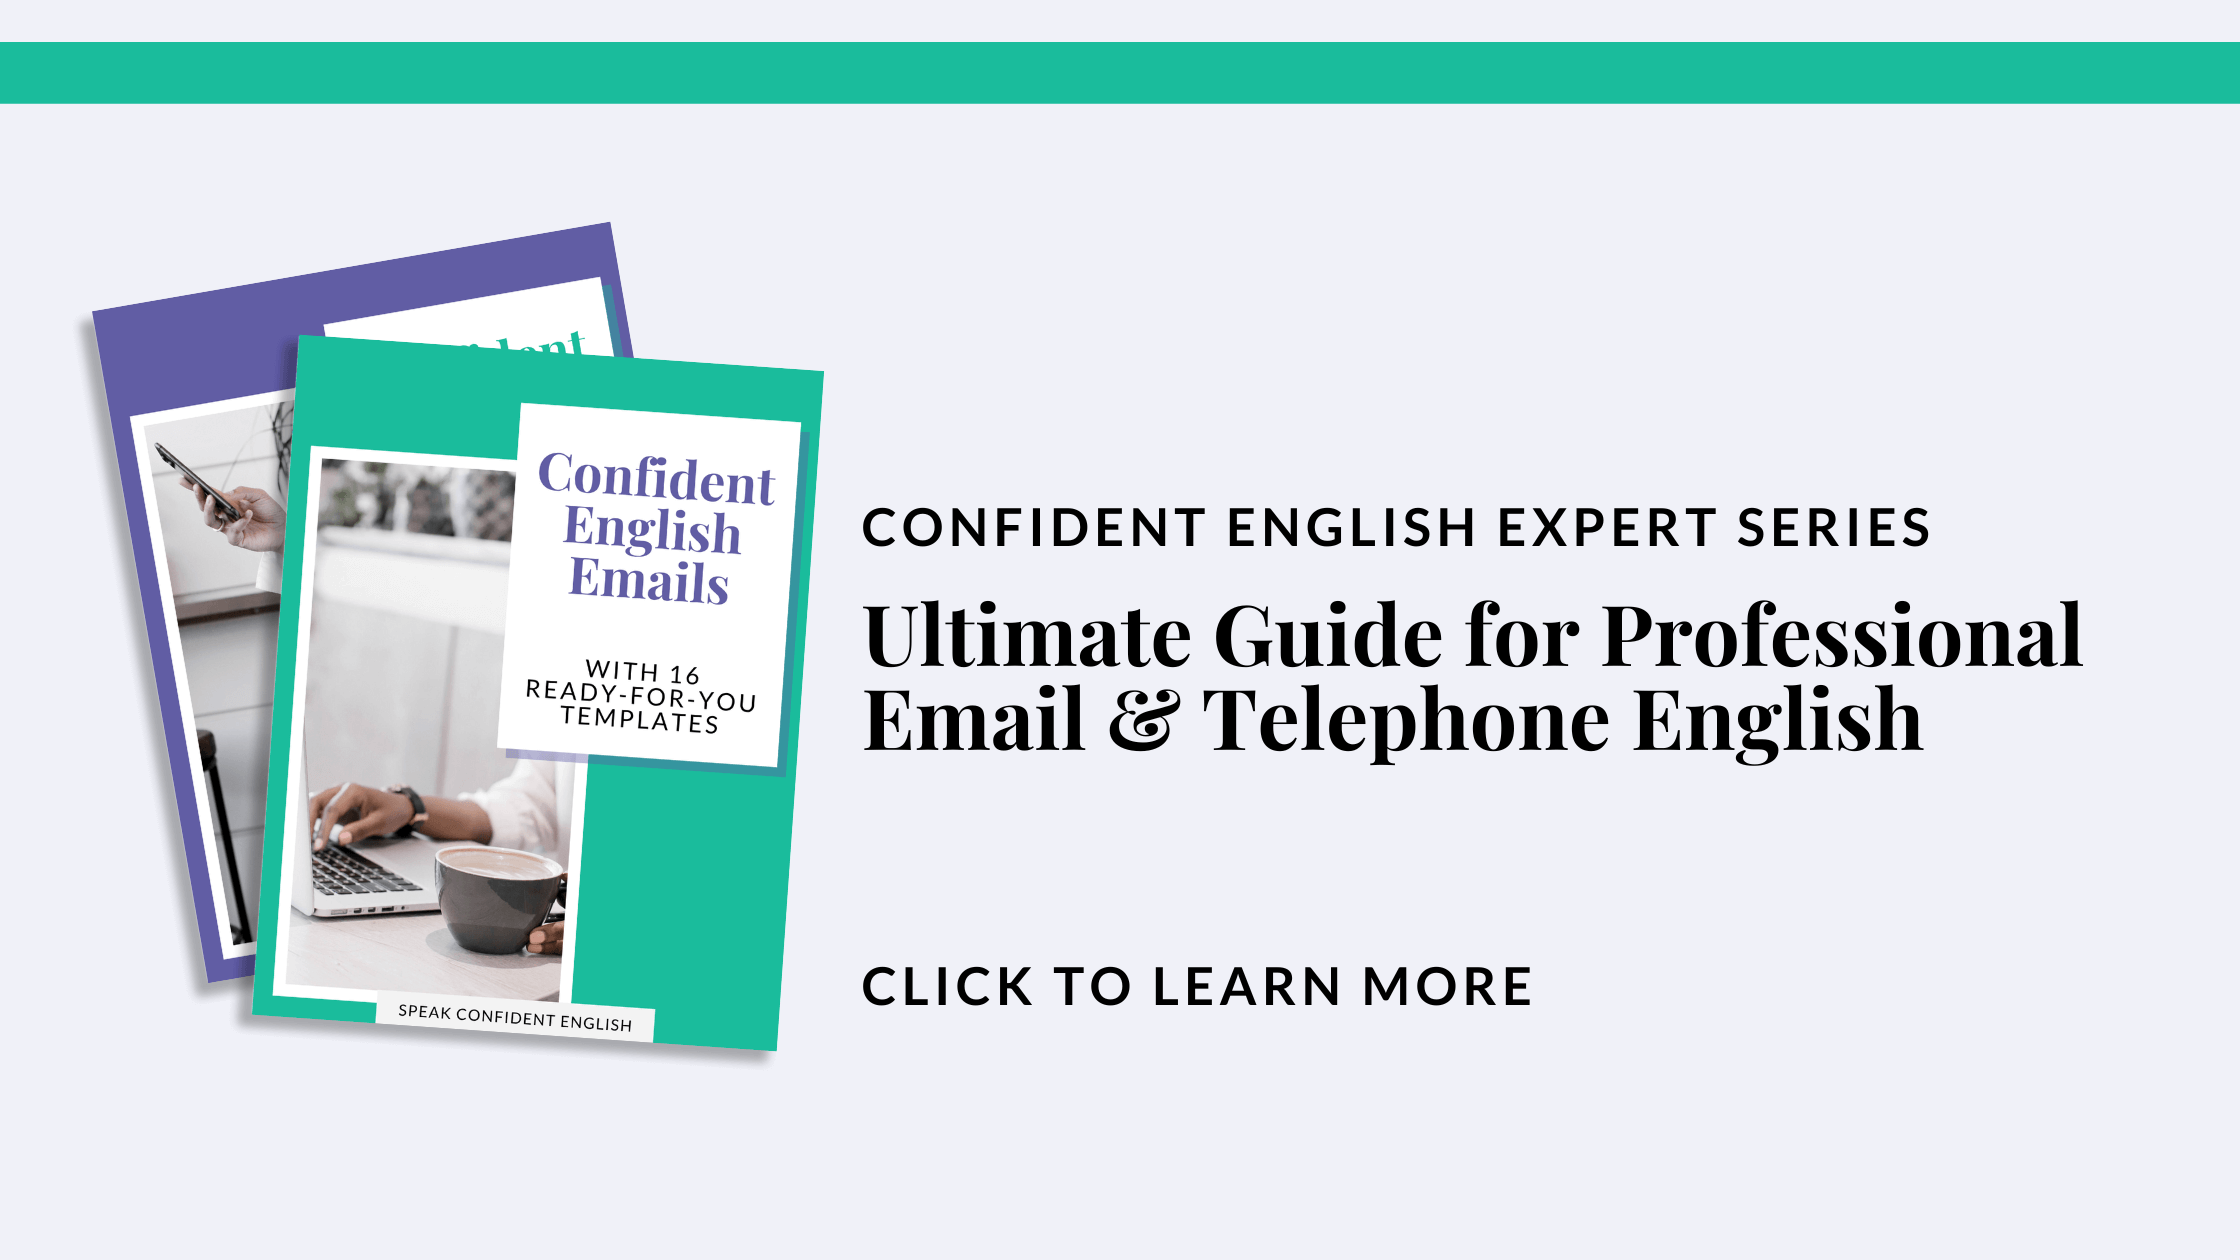 How to Write an Email in English, Smart Tips for Writing - Love English